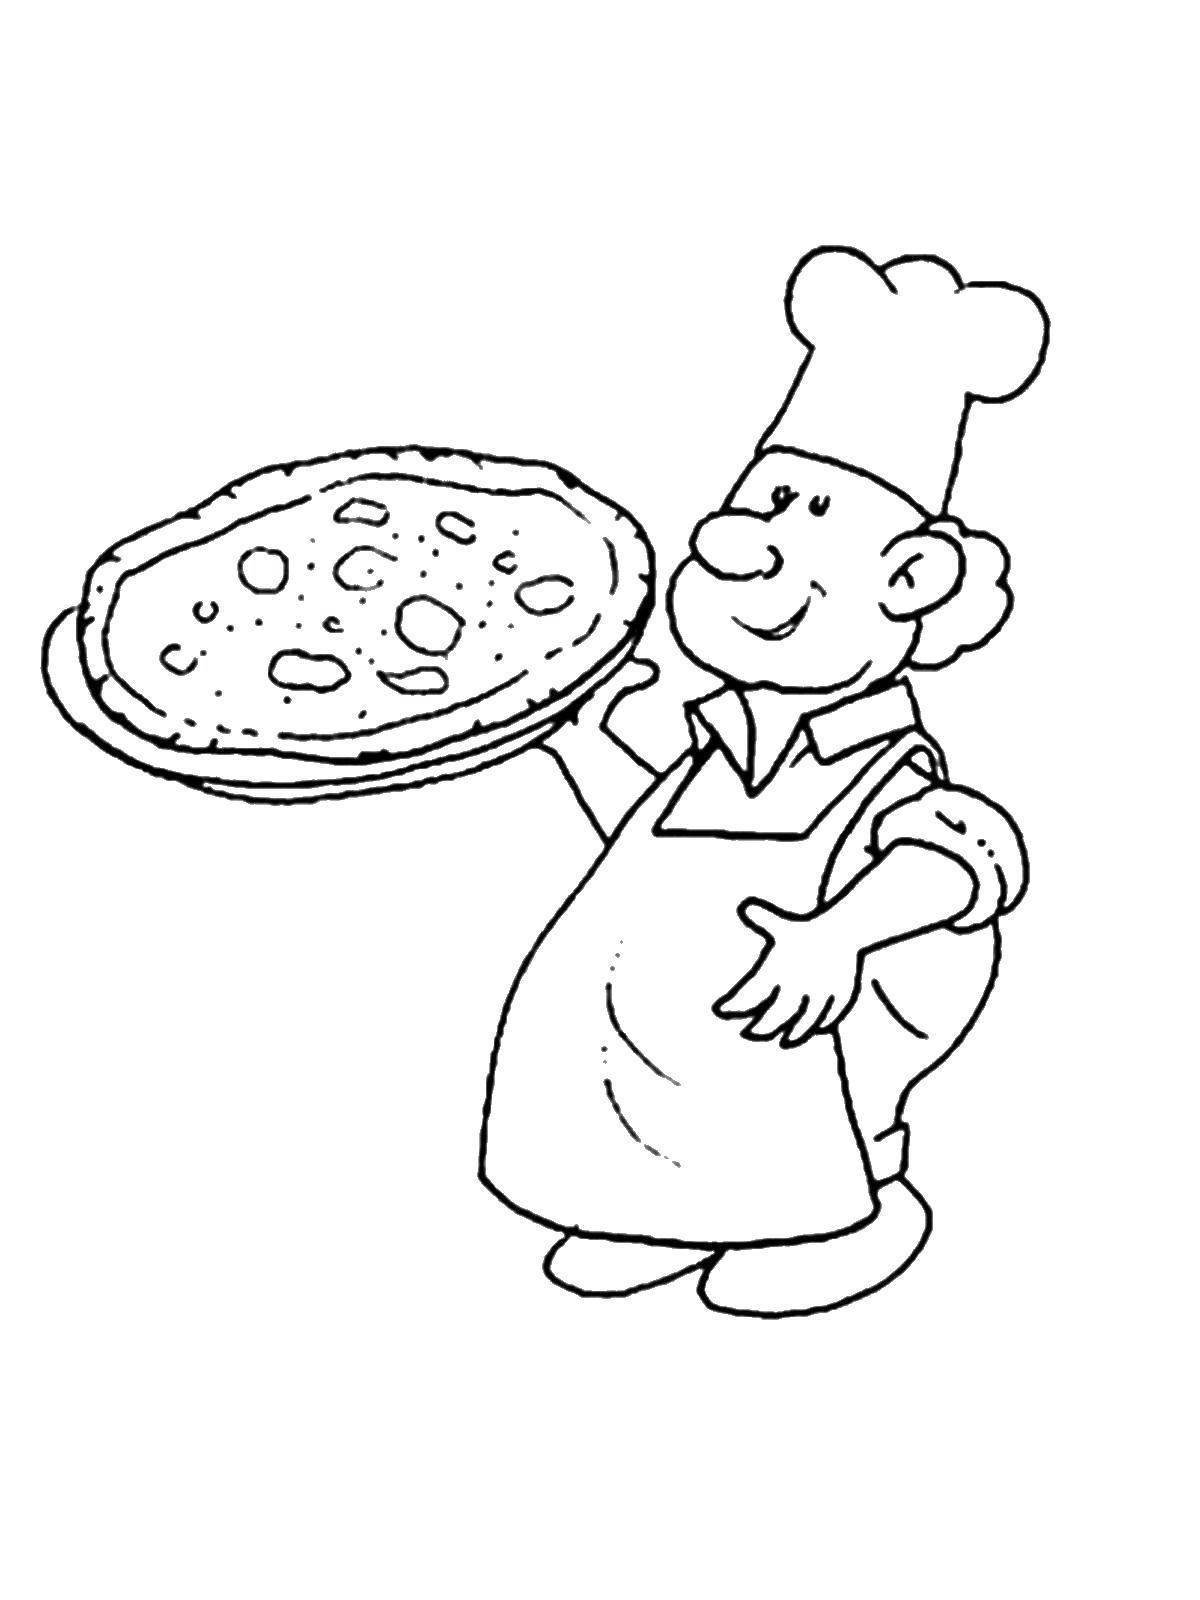 Coloring pages crazy chef profession